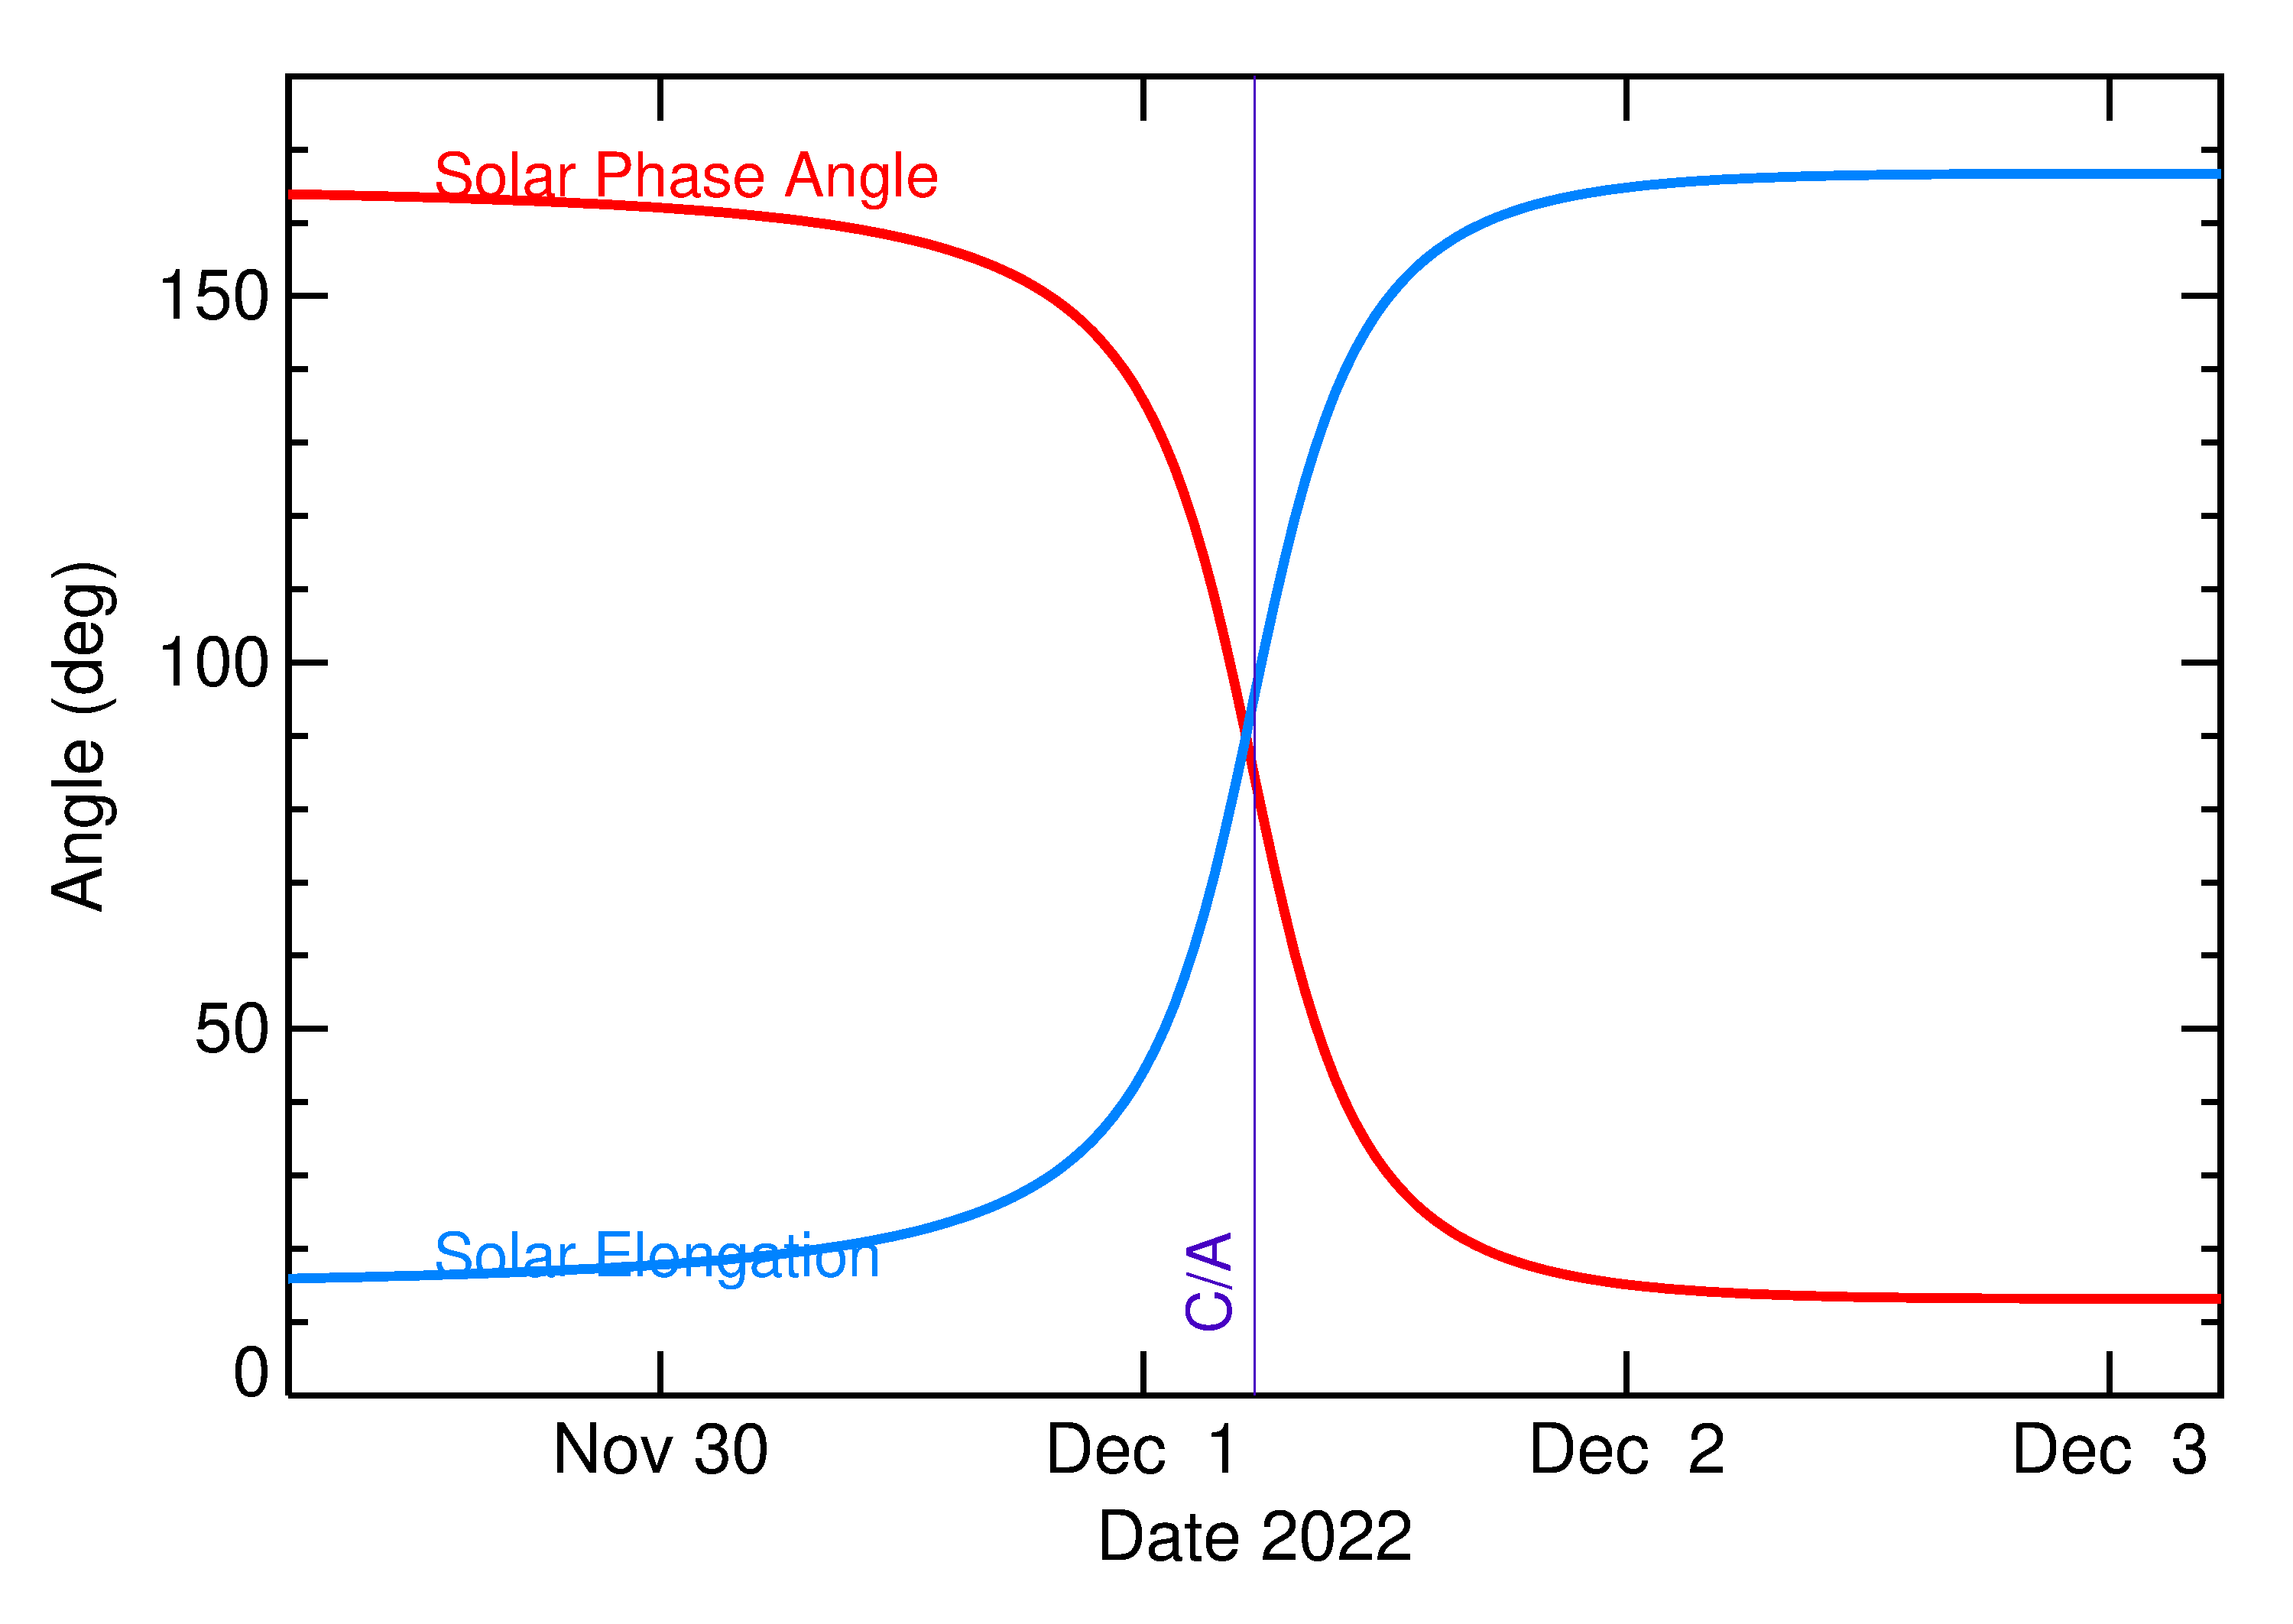 Solar Elongation and Solar Phase Angle of 2022 XL in the days around closest approach